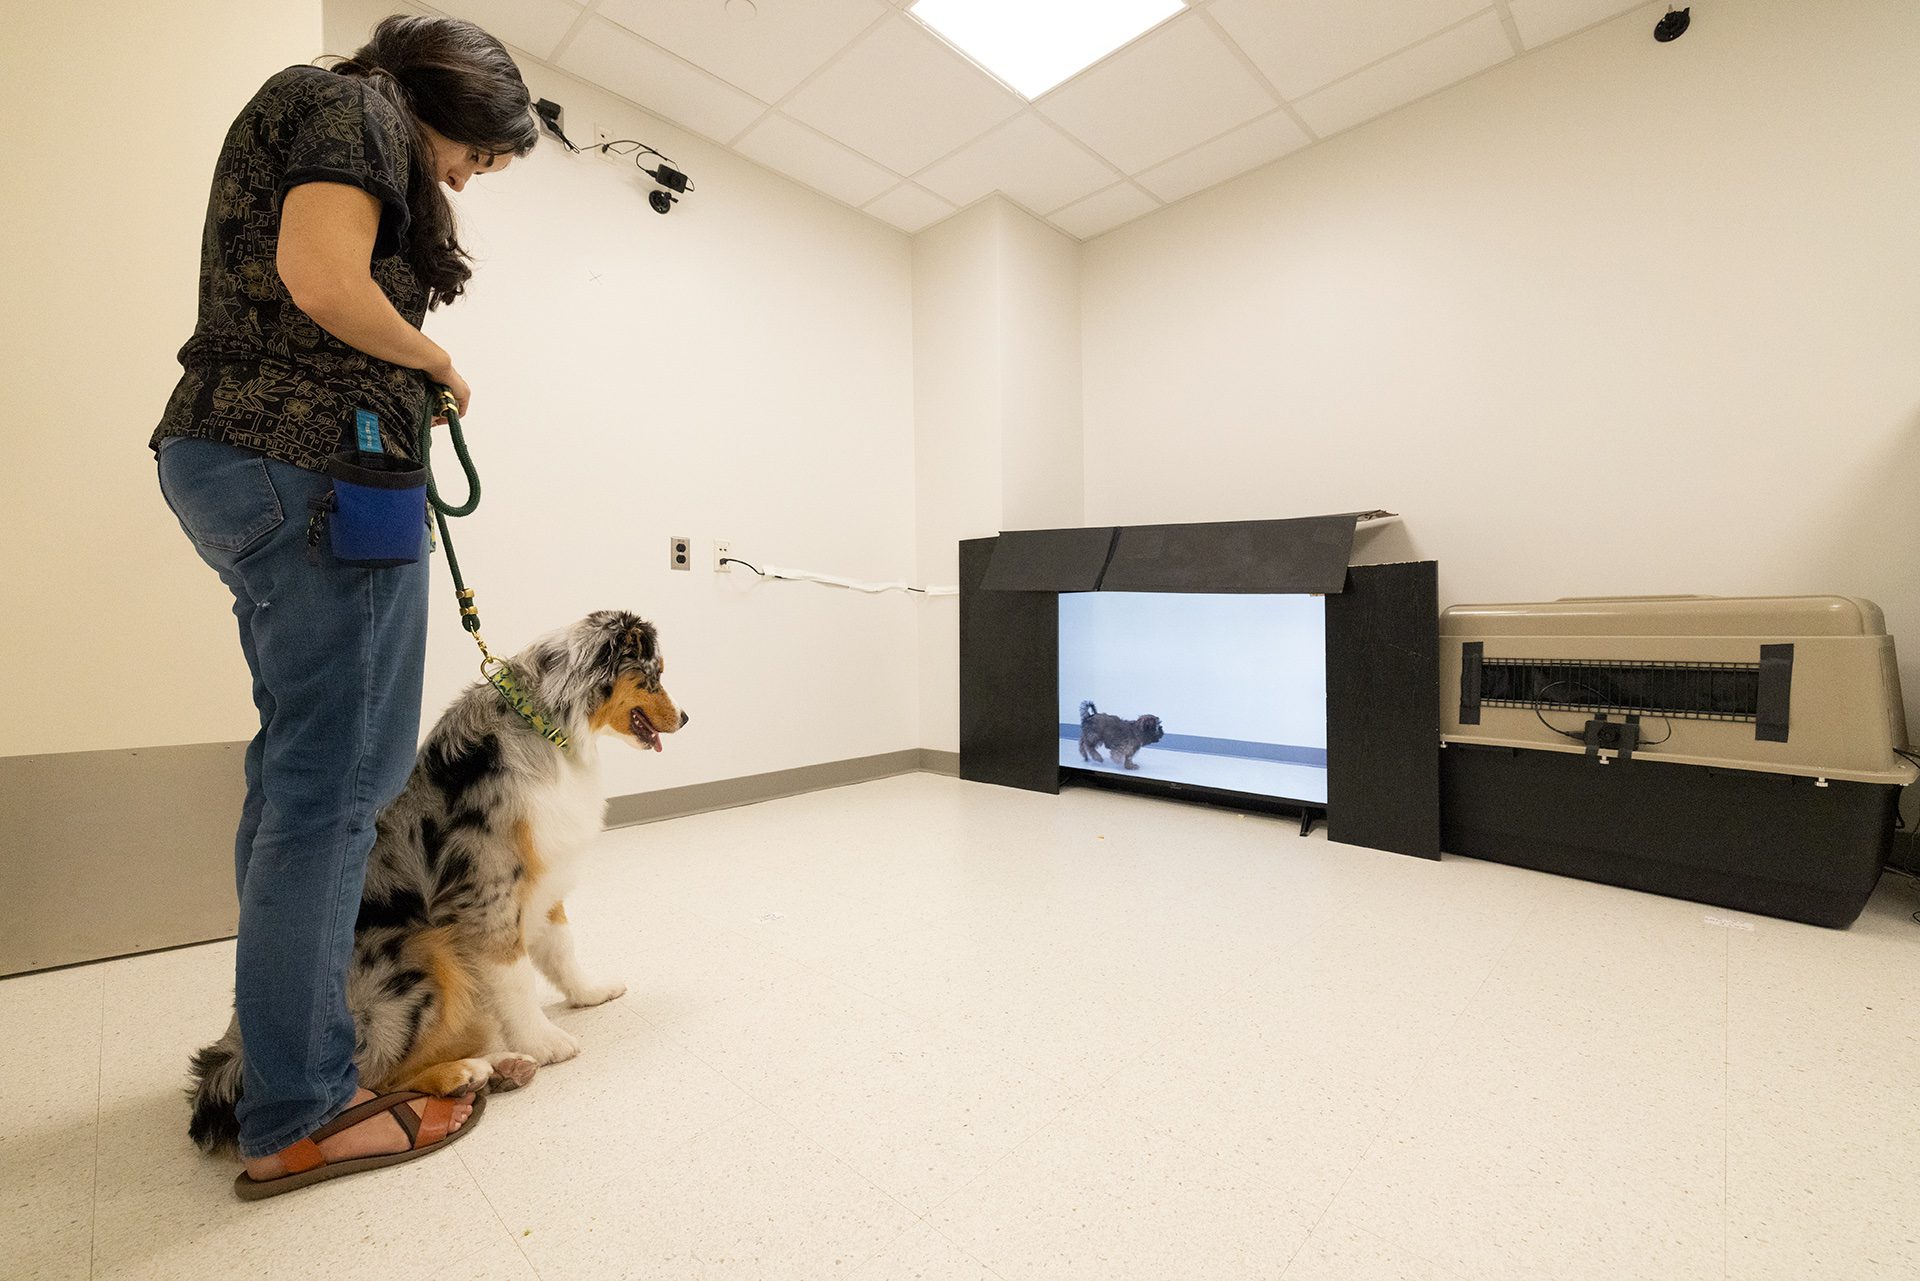 This image shows a dog cognition experiment